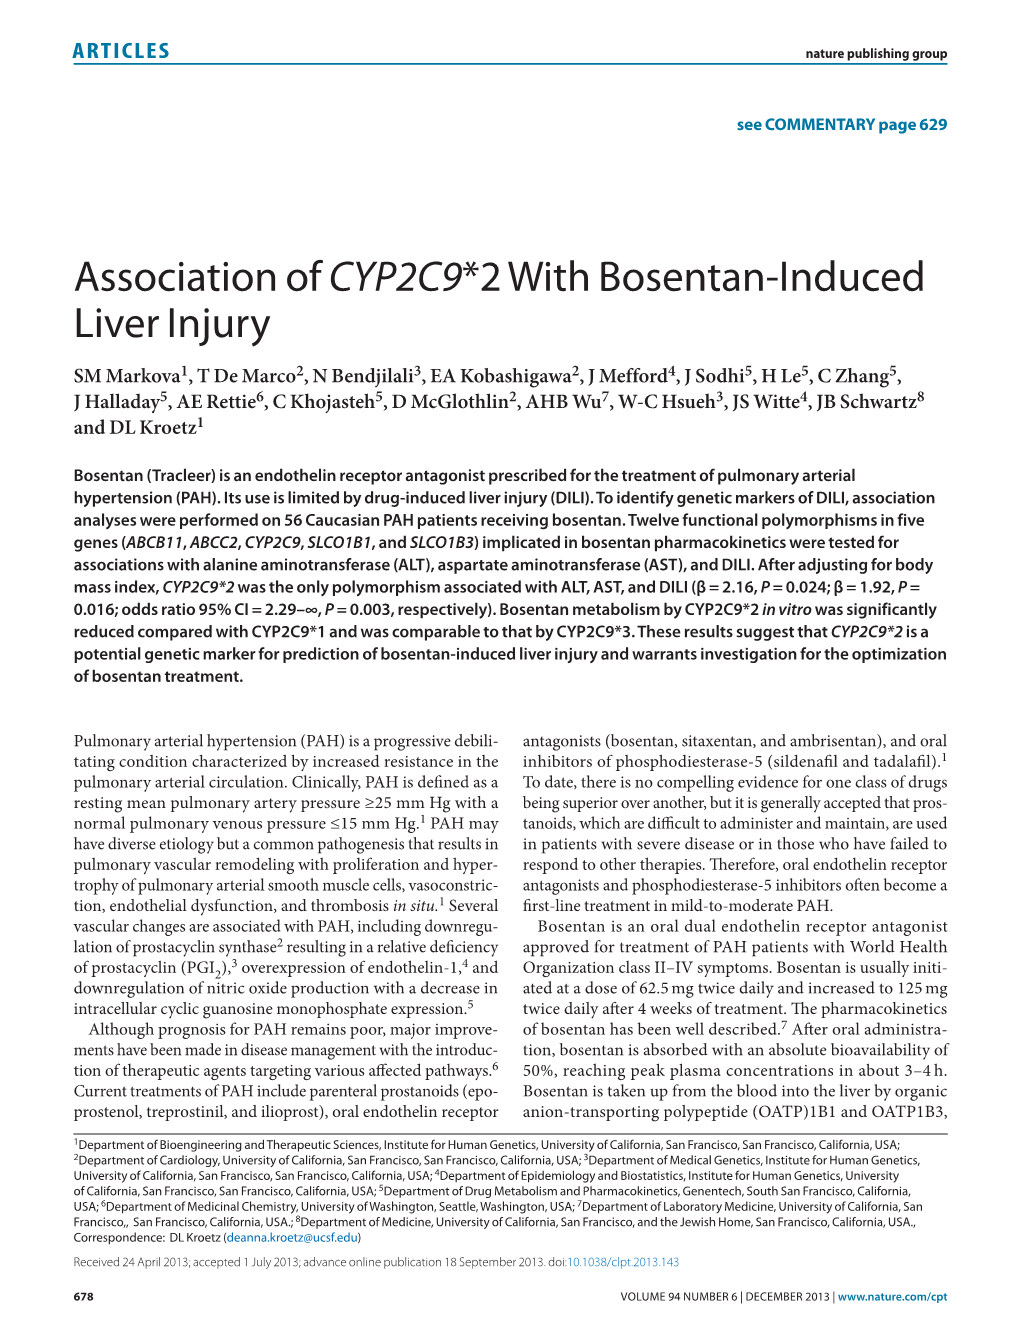 Association of CYP2C92 with Bosentaninduced Liver Injury